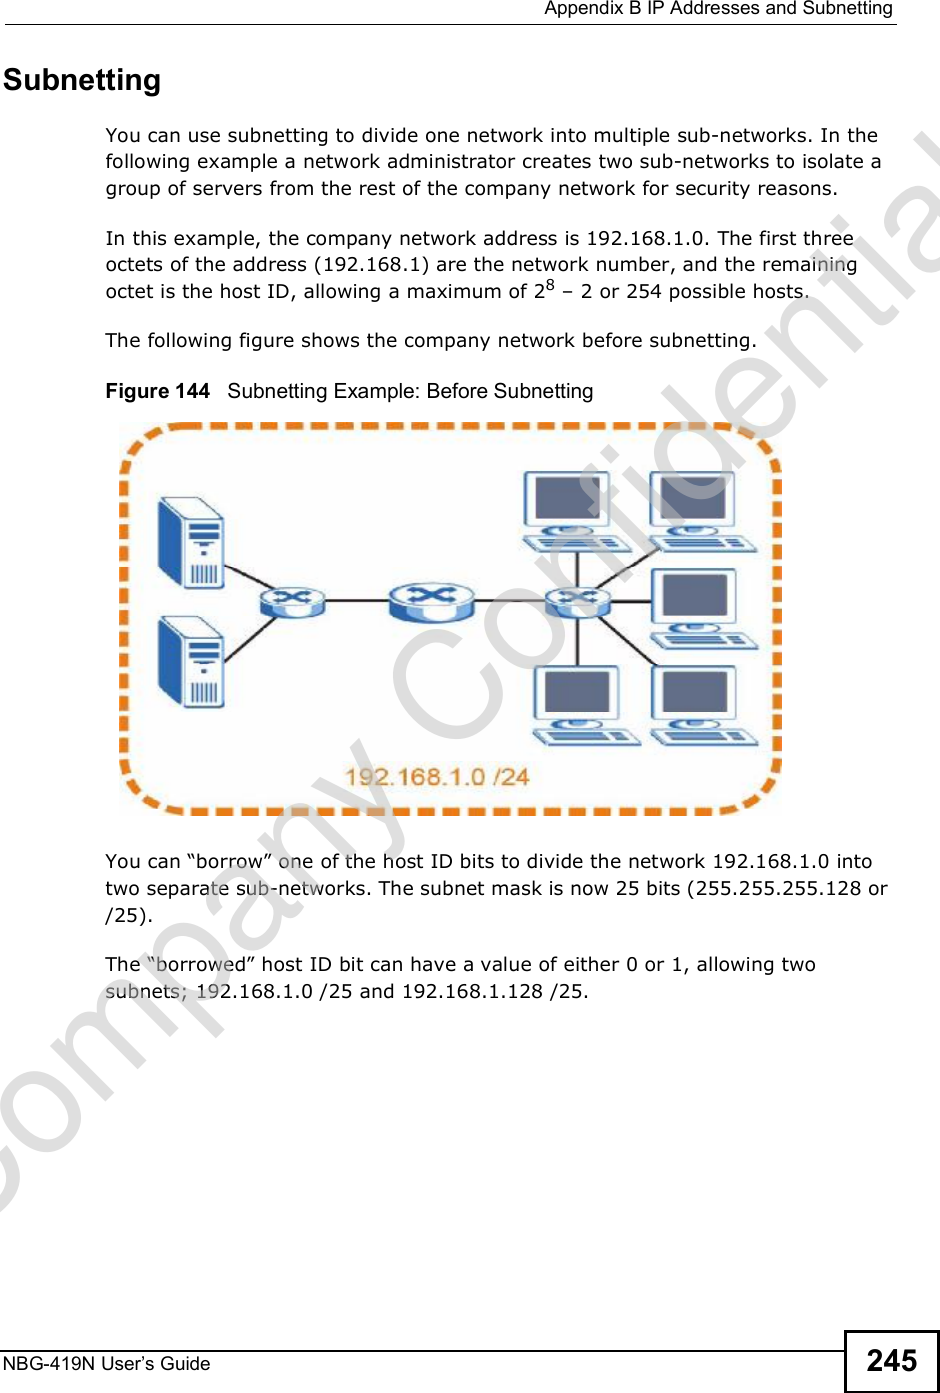  Appendix BIP Addresses and SubnettingNBG-419N User s Guide 245SubnettingYou can use subnetting to divide one network into multiple sub-networks. In the following example a network administrator creates two sub-networks to isolate a group of servers from the rest of the company network for security reasons.In this example, the company network address is 192.168.1.0. The first three octets of the address (192.168.1) are the network number, and the remaining octet is the host ID, allowing a maximum of 28 $ 2 or 254 possible hosts.The following figure shows the company network before subnetting.  Figure 144   Subnetting Example: Before SubnettingYou can &quot;borrow# one of the host ID bits to divide the network 192.168.1.0 into two separate sub-networks. The subnet mask is now 25 bits (255.255.255.128 or /25).The &quot;borrowed# host ID bit can have a value of either 0 or 1, allowing two subnets; 192.168.1.0 /25 and 192.168.1.128 /25. Company Confidential